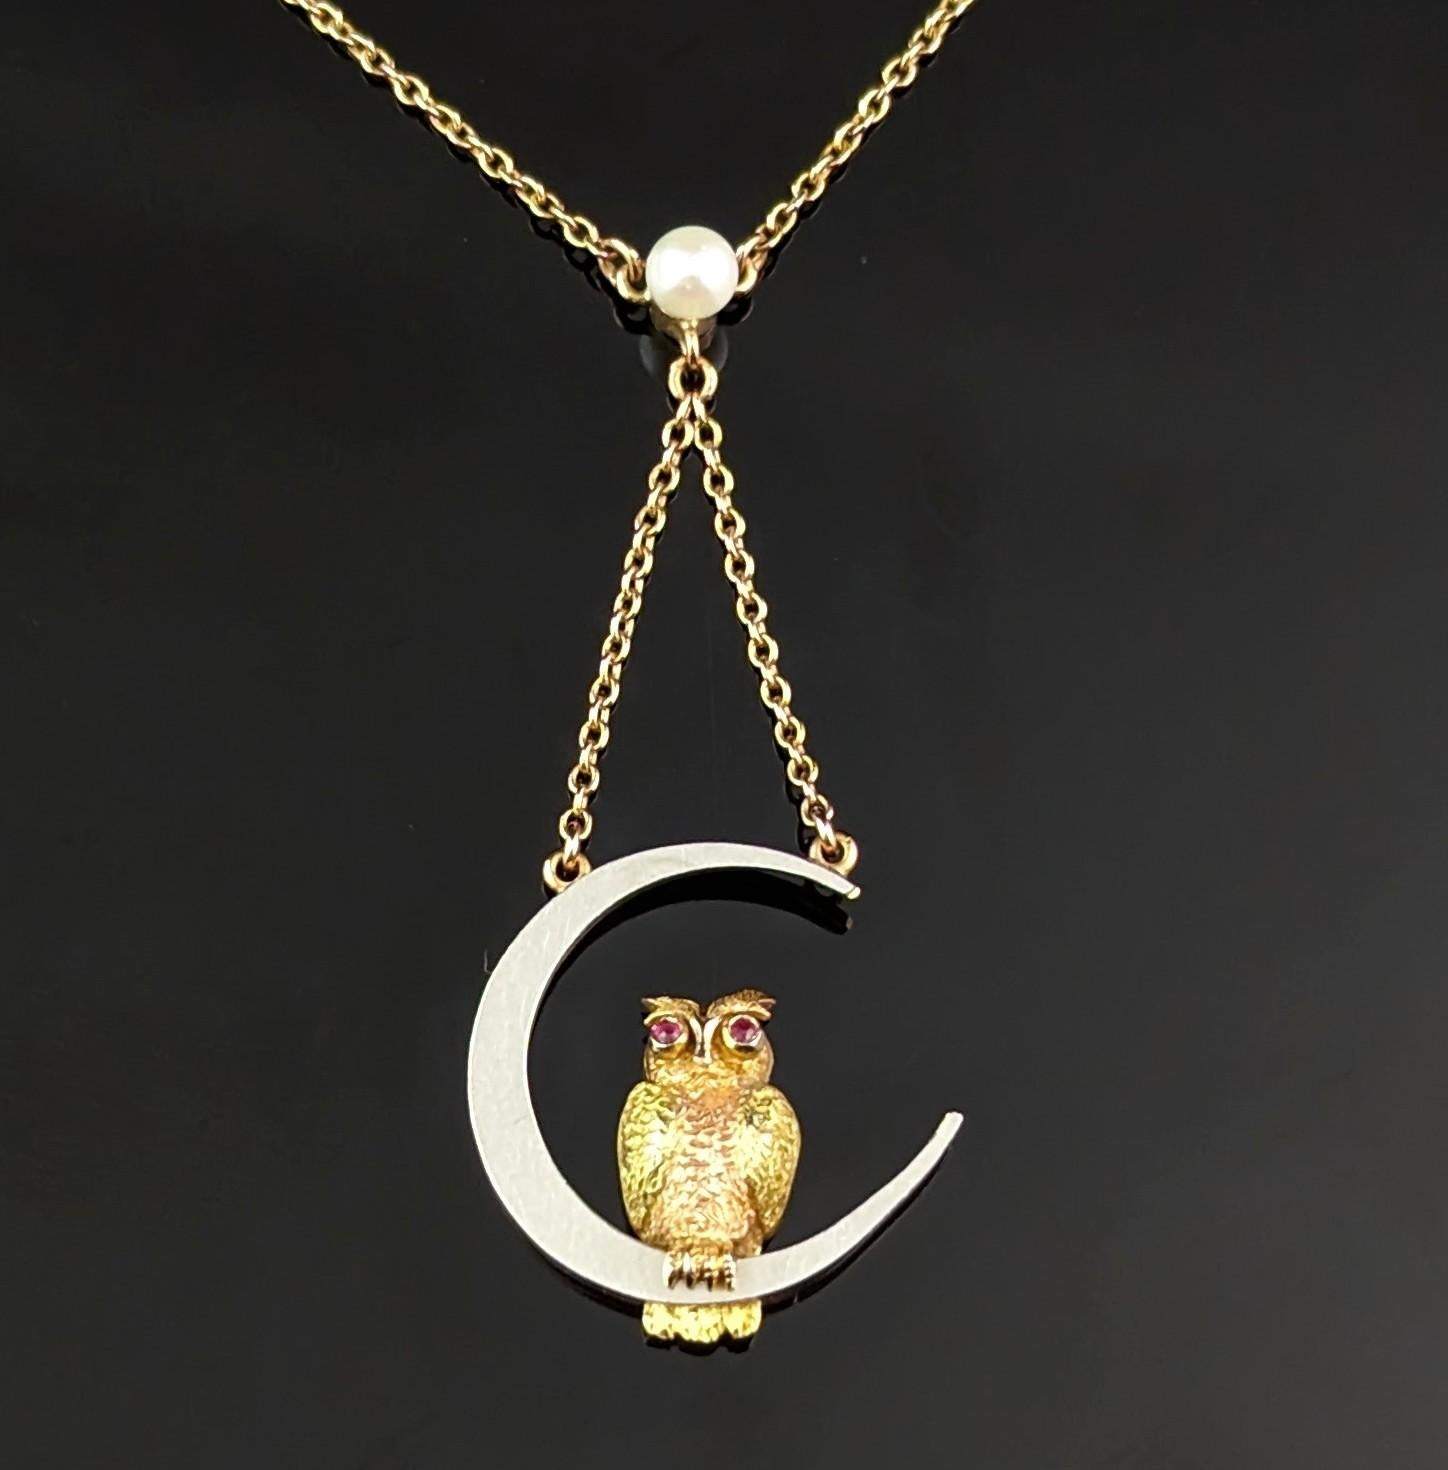 Antique Owl and Crescent moon pendant necklace, 15k gold and platinum, Ruby For Sale 5